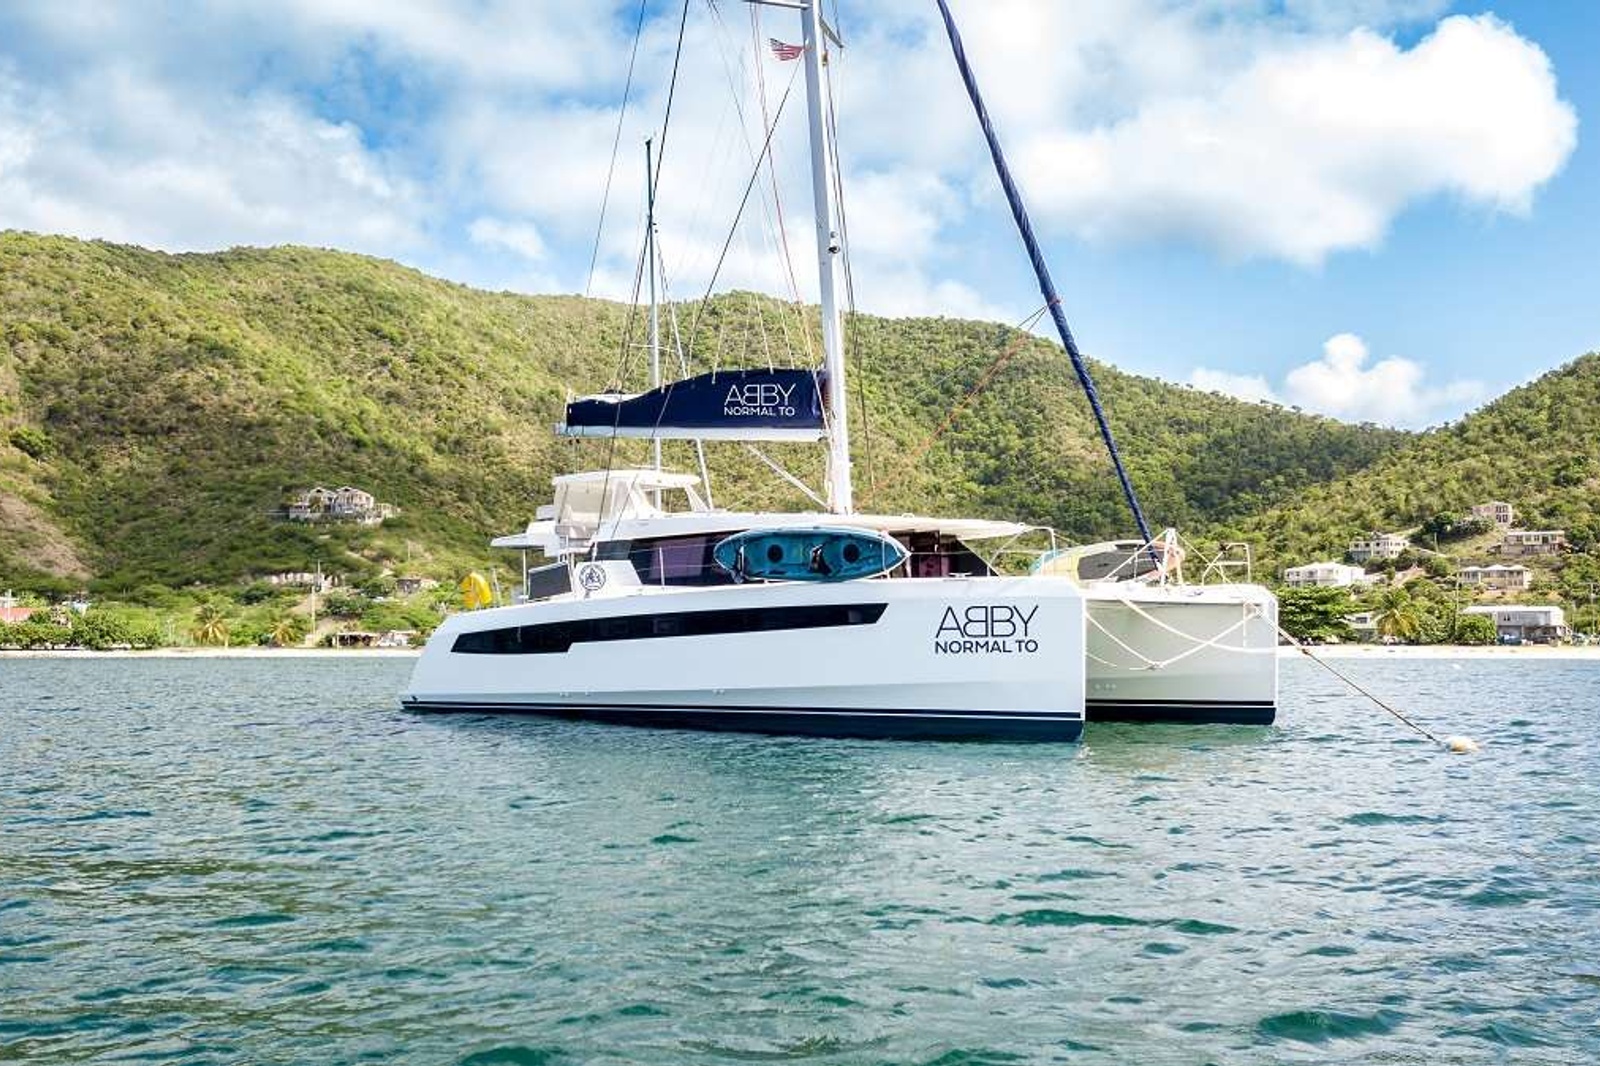 In 2019 when the Leopard 50 was voted the Best Charter Boat of the Year by Cruising World, the magazine stated that it was the “Best boat for a sailing vacation.”

Abby Normal To is quite spacious, with many different social areas, which can be used for games with friends or for quiet time reading, writing or even painting. There are 4 cabins and 4 heads for guests (plus a fifth cabin and head for the crew.) The cabins are comfortable and immaculate and there is a door that goes outside to the front of the boat where there is a sitting area from which to watch for your next landmark.

Come join Captain Richard and his wife, Chef Shannon, for an 'easy adventure' you will always remember!